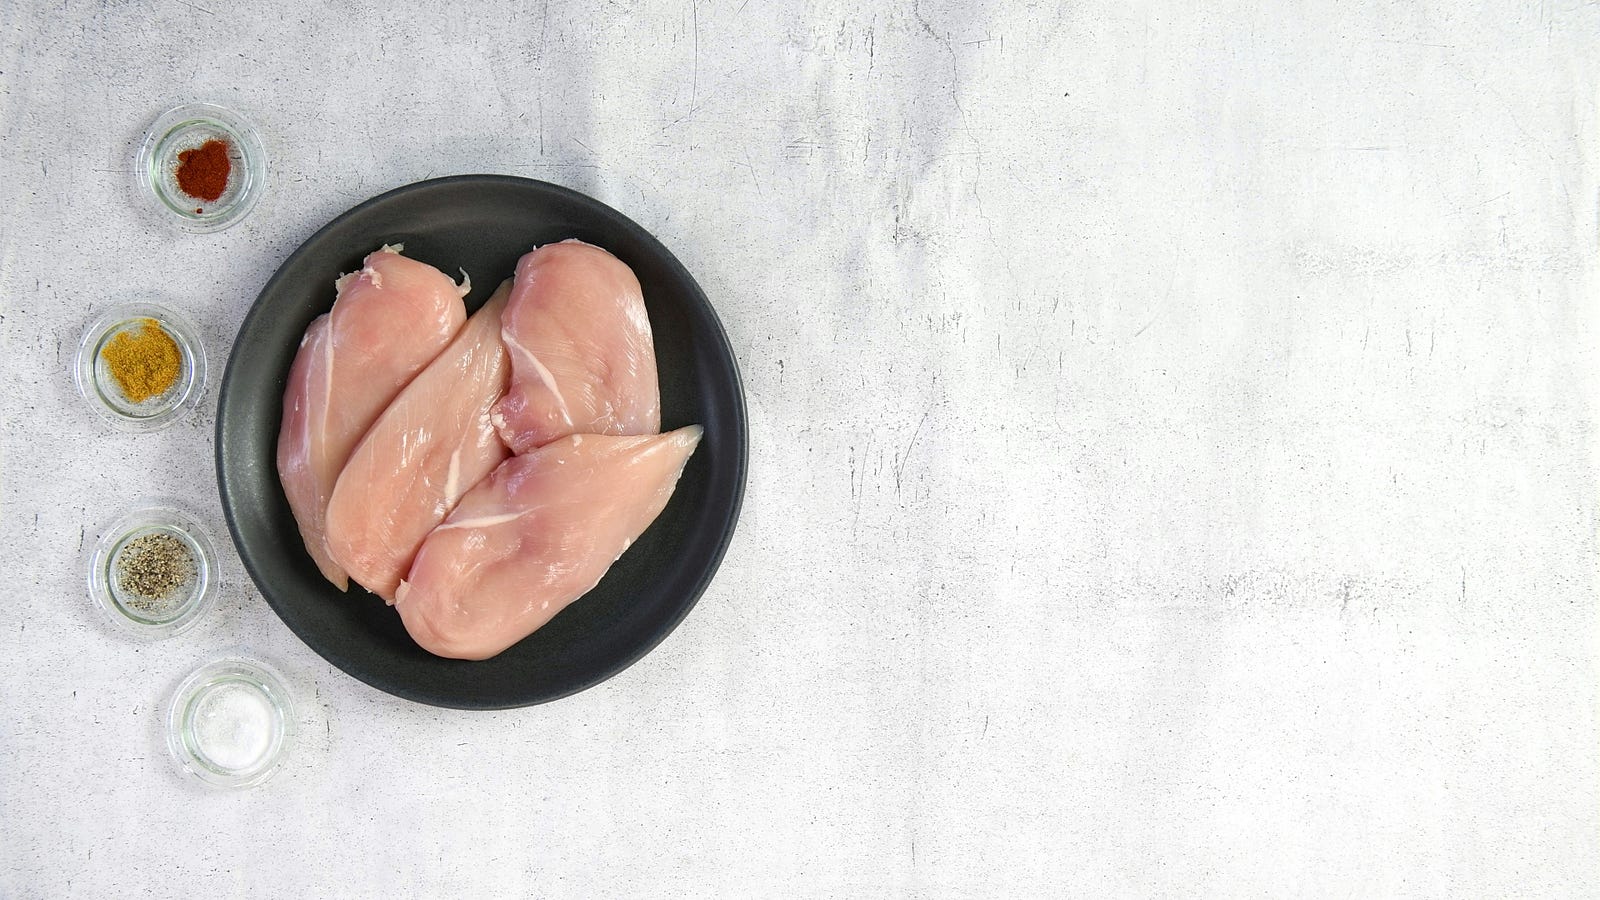 Raw chicken on a black plate.